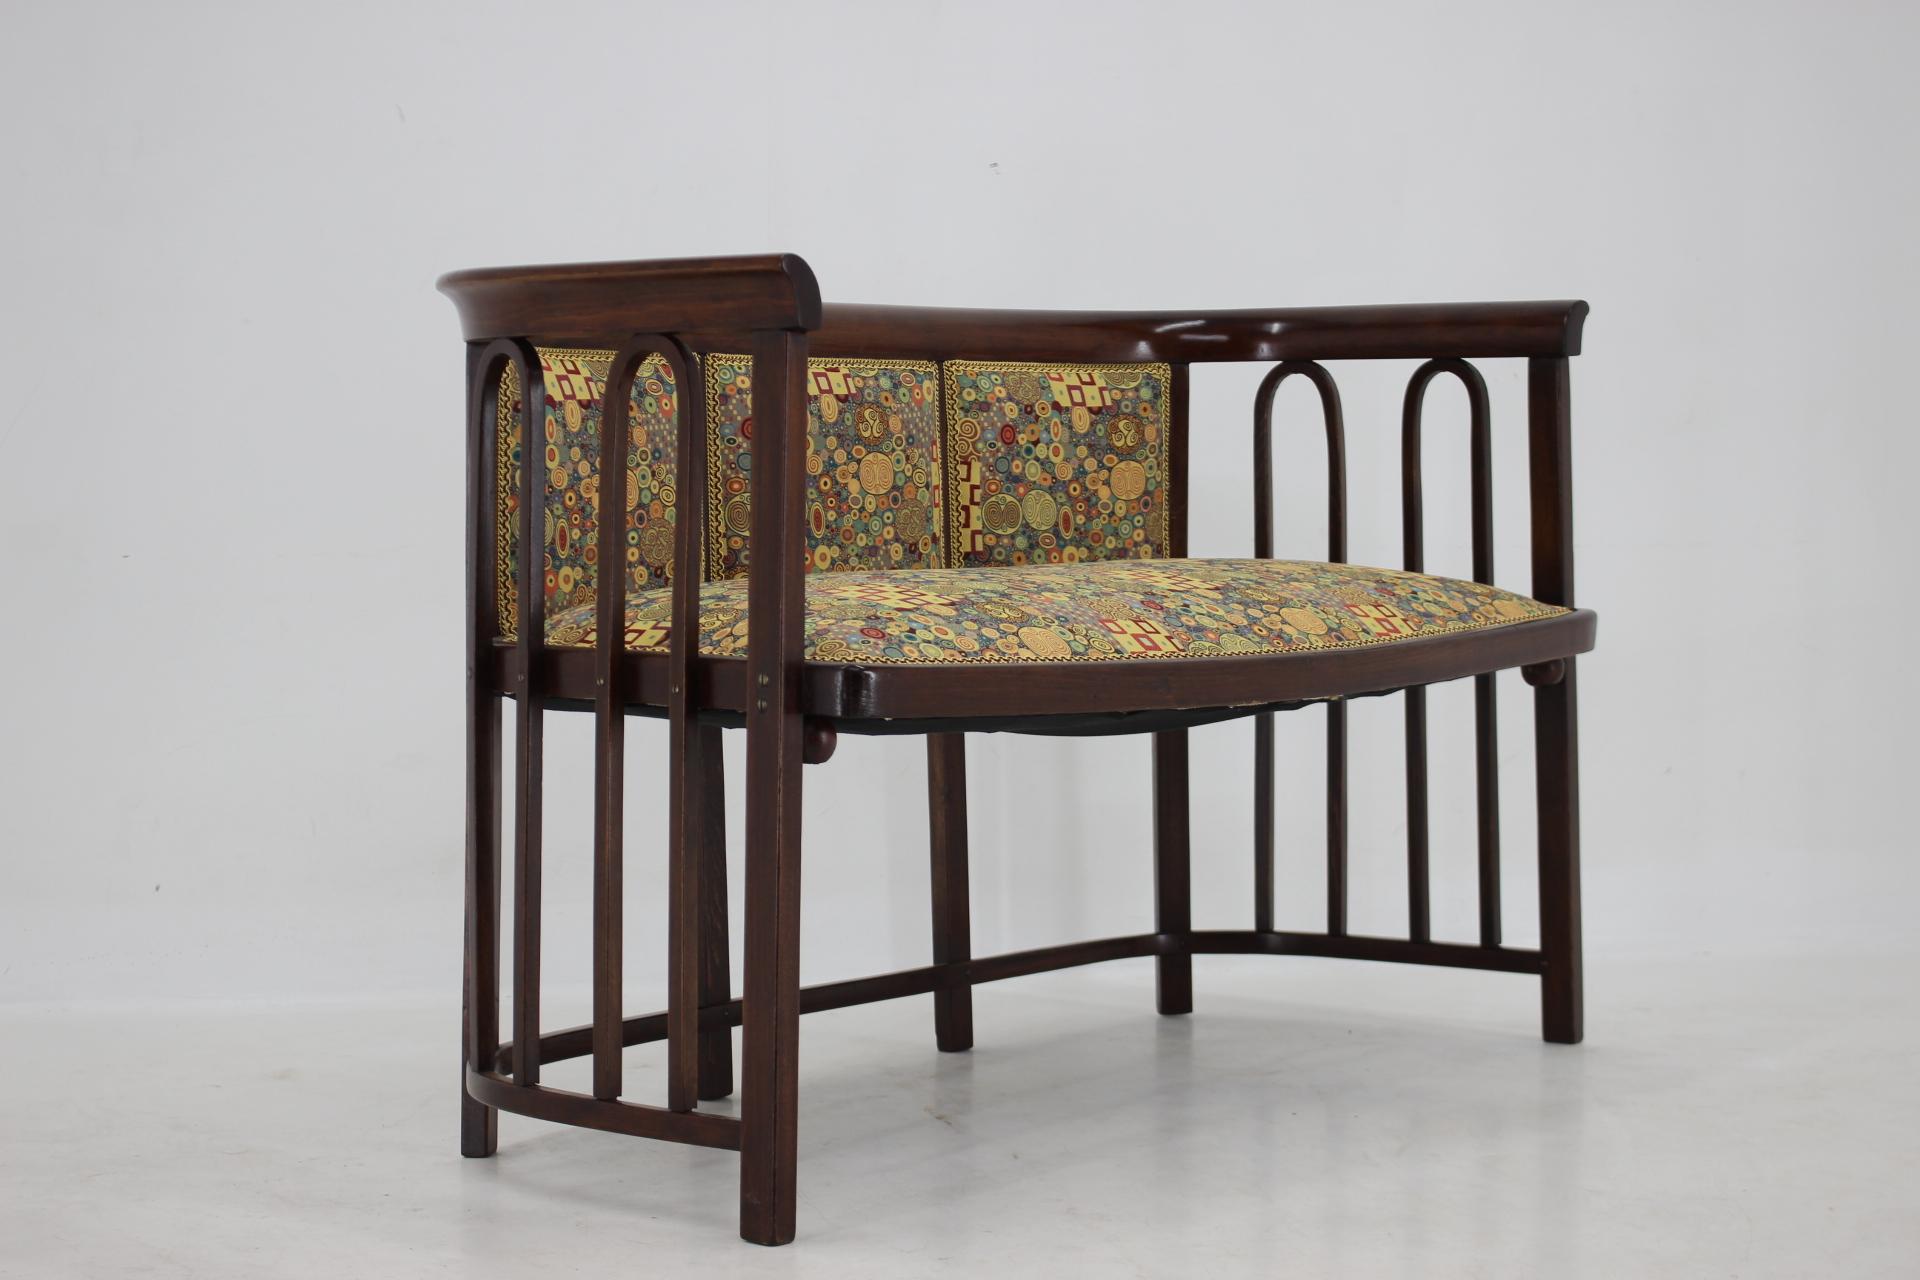 Carefully refurbished and finished in Shellac
Professionally reupholstered in old technique and quality fabric designed by Gustav Klimt.
 